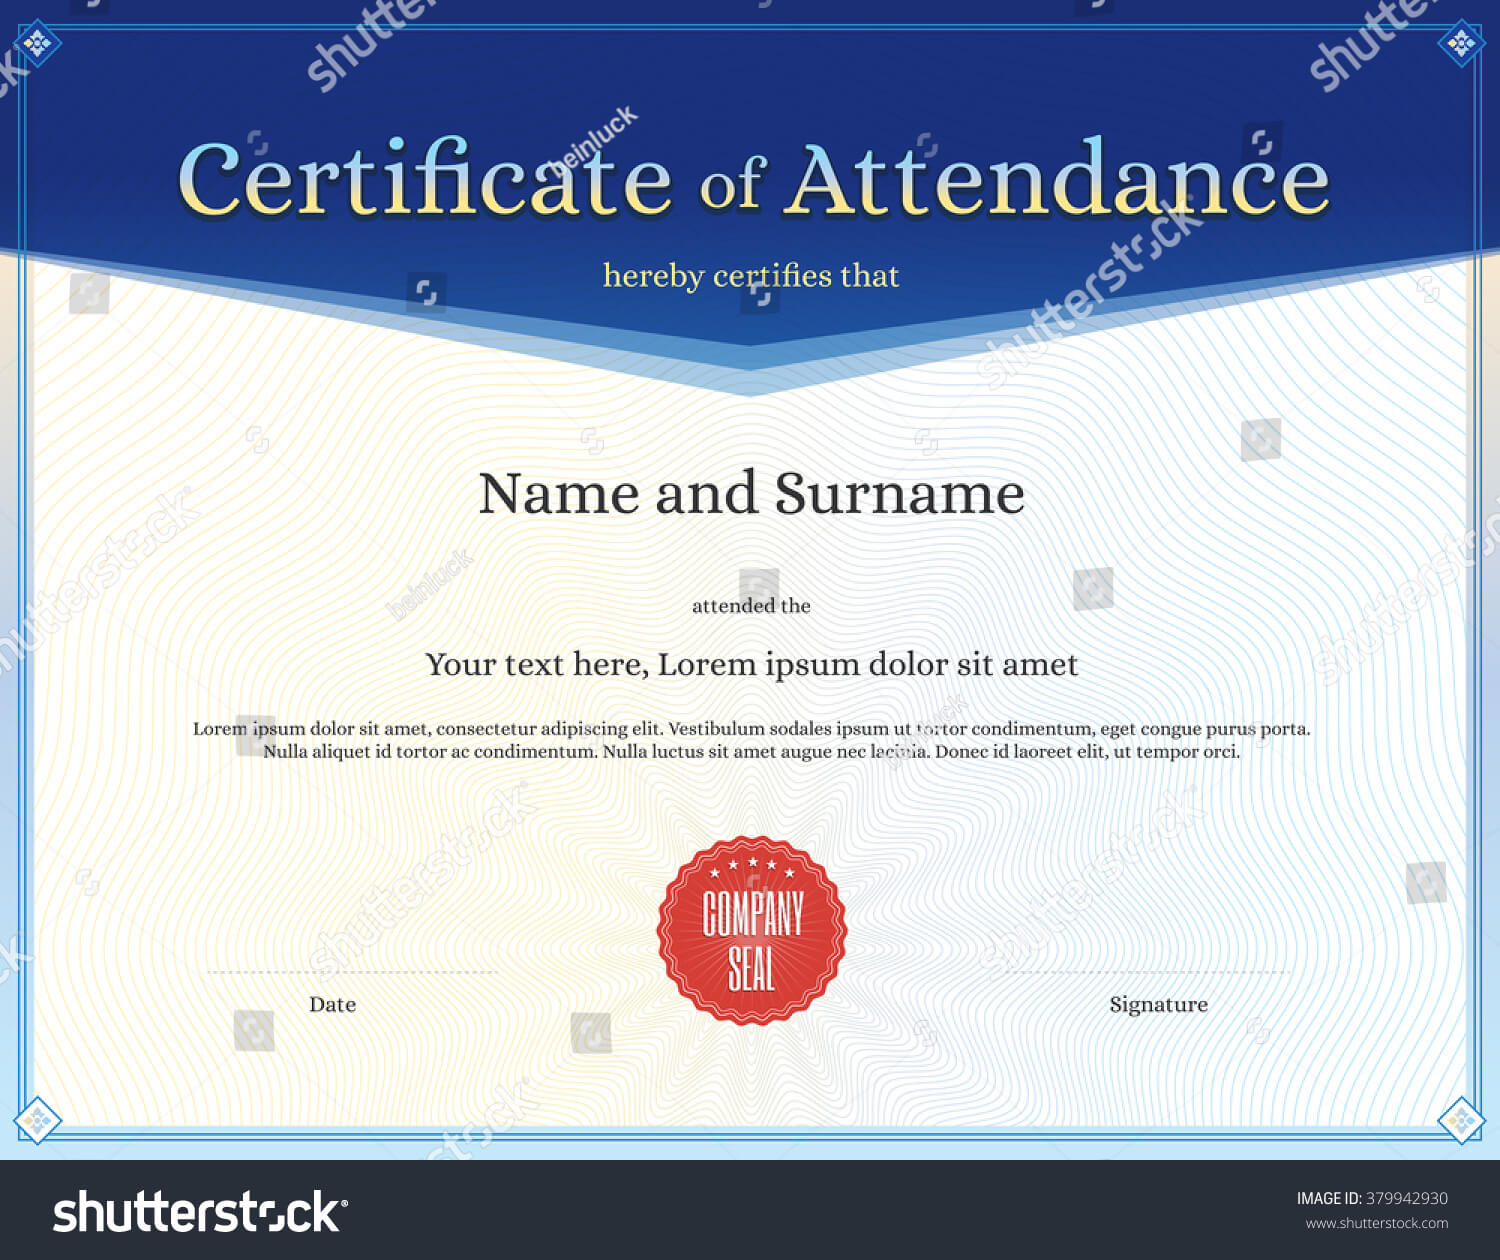 Certificate Completion Template Fresh Certificates Fice With Certificate Of Attendance Conference Template